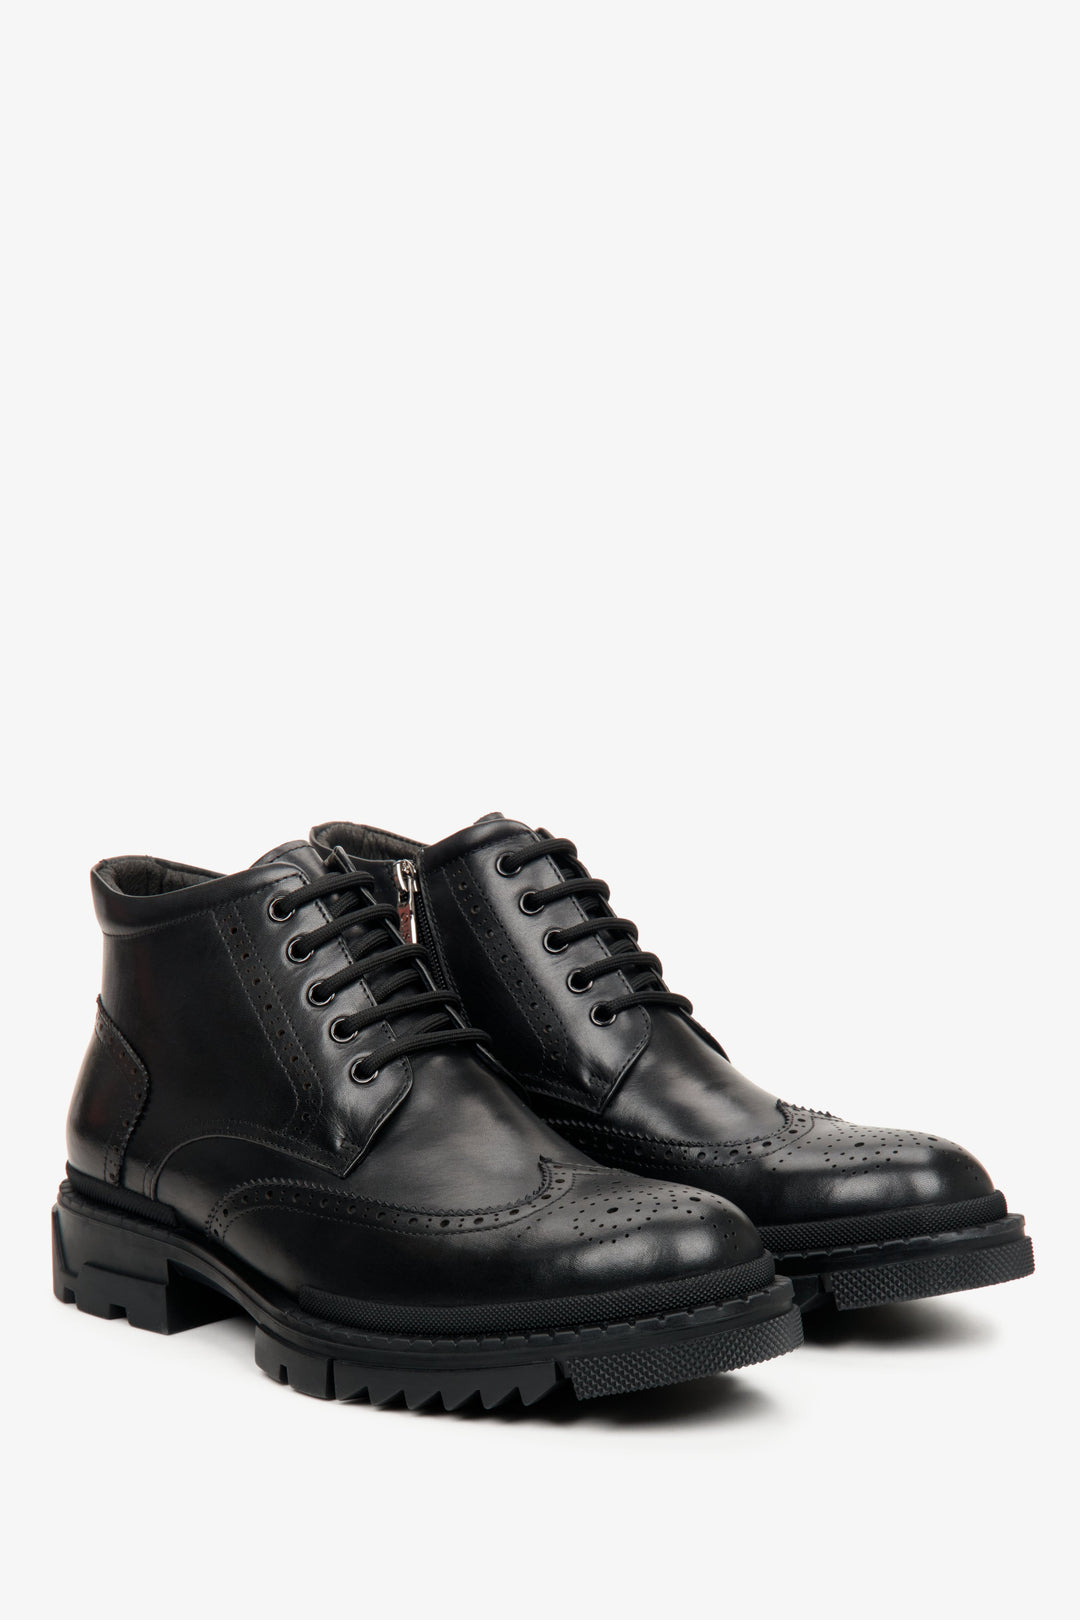 Men's black winter ankle boots made of genuine leather - close-up of the side profile and toe of the shoe.